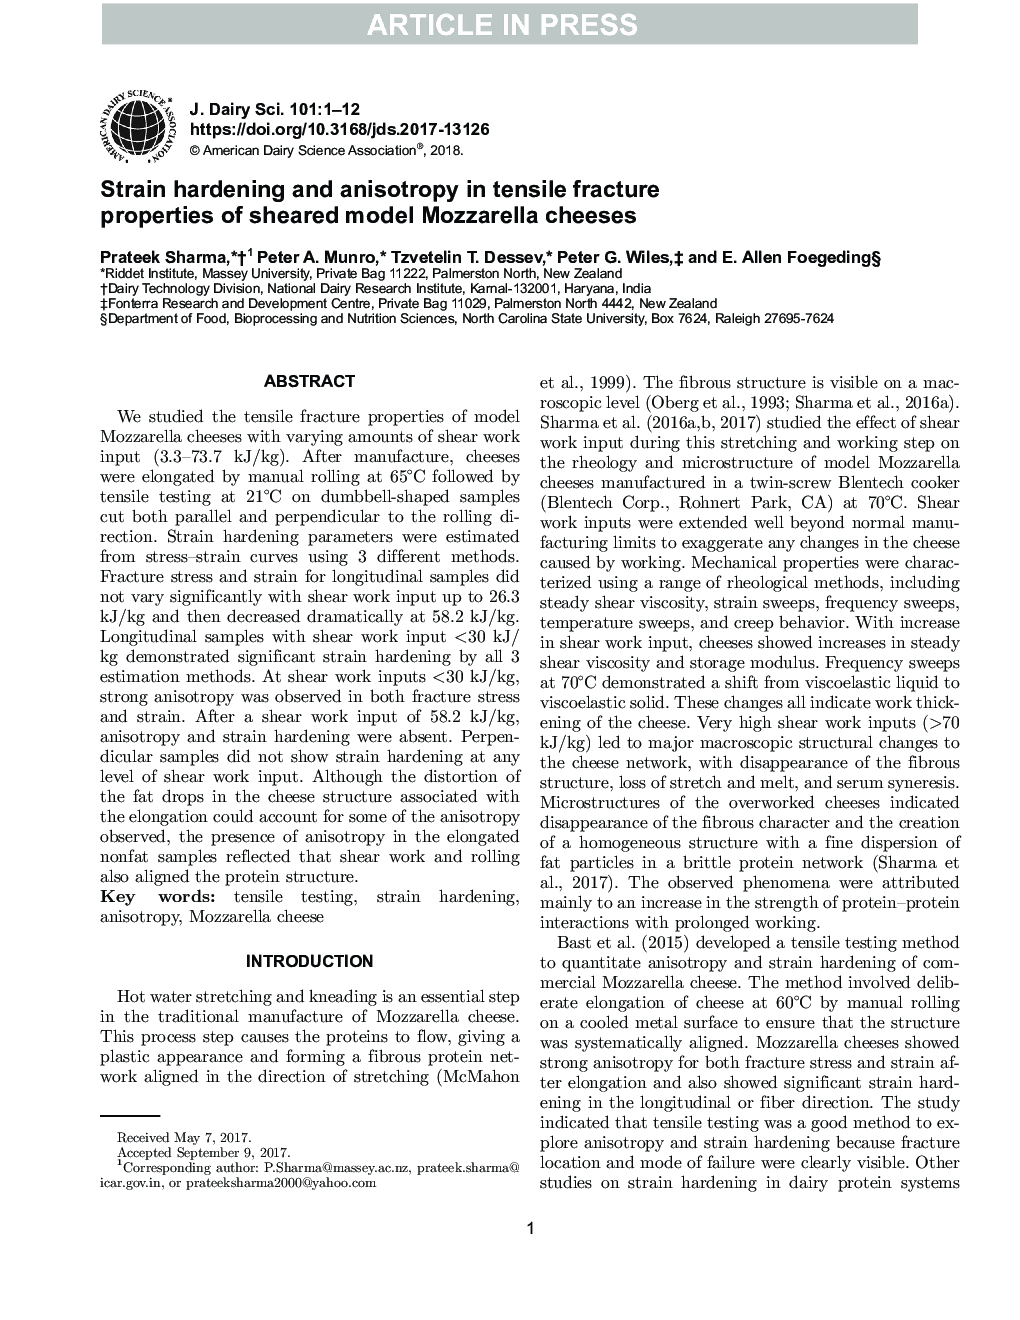 Strain hardening and anisotropy in tensile fracture properties of sheared model Mozzarella cheeses